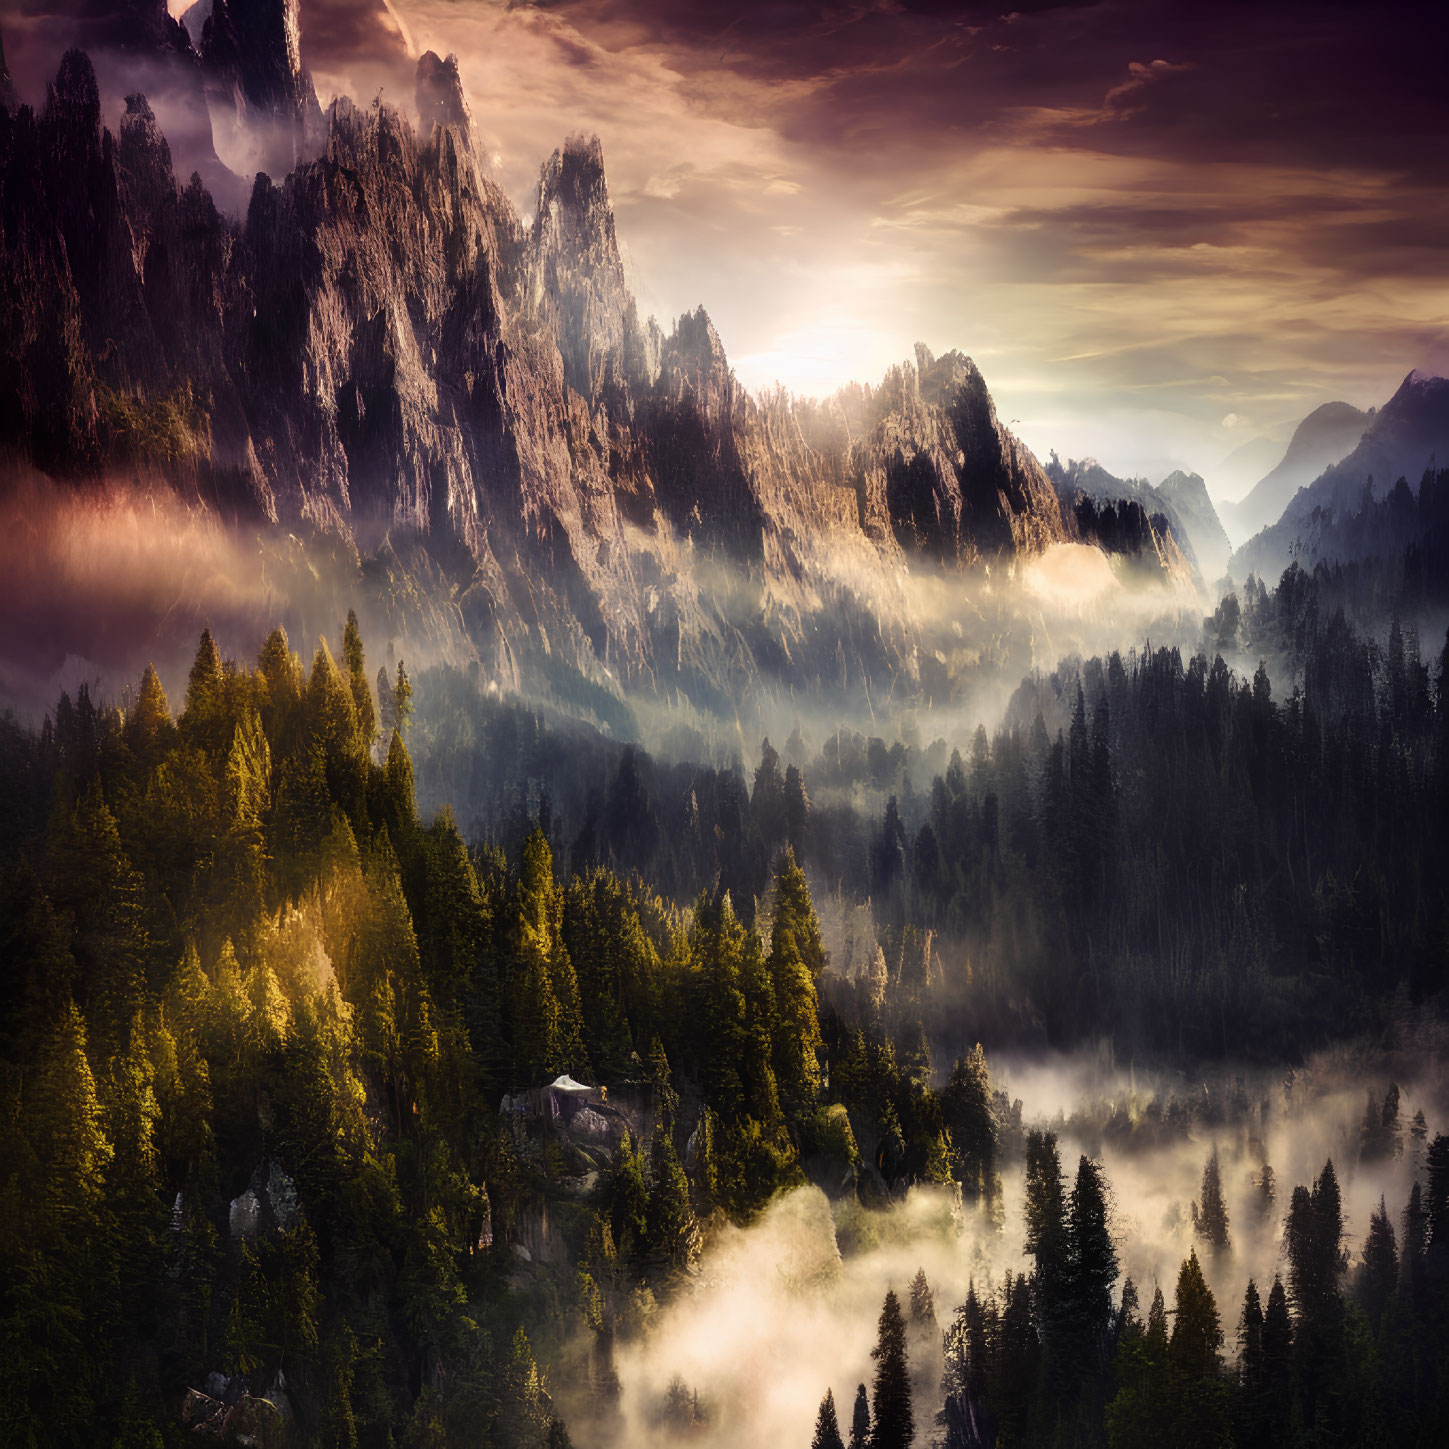 Sunrays piercing mist over mountain forest at sunset